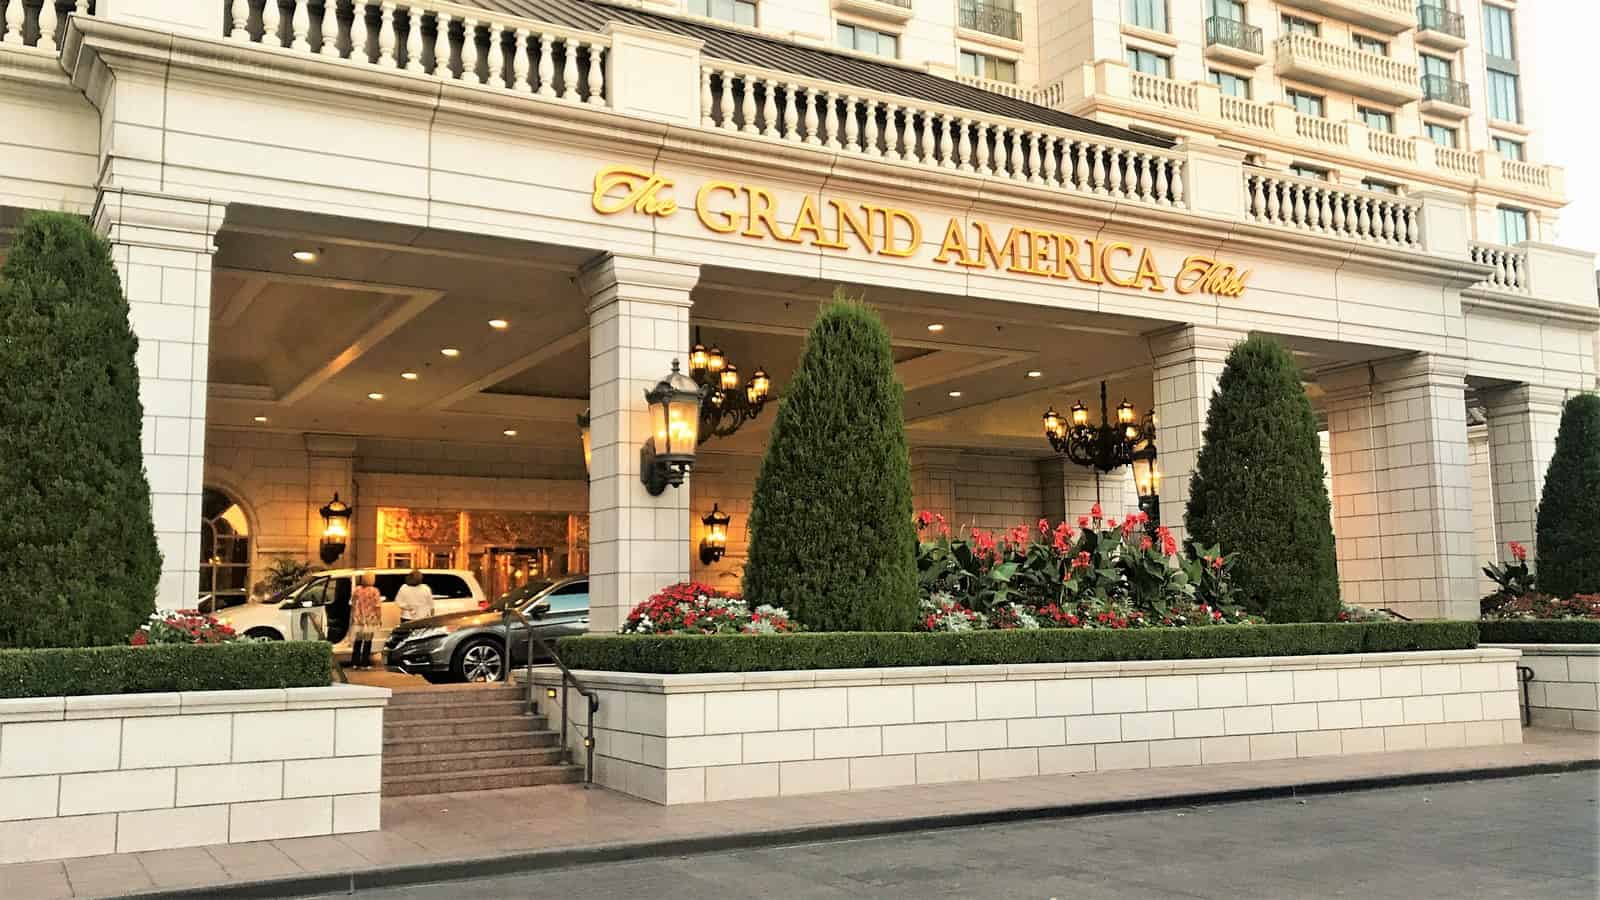 Grand America Hotel - Things to do in salt lake city